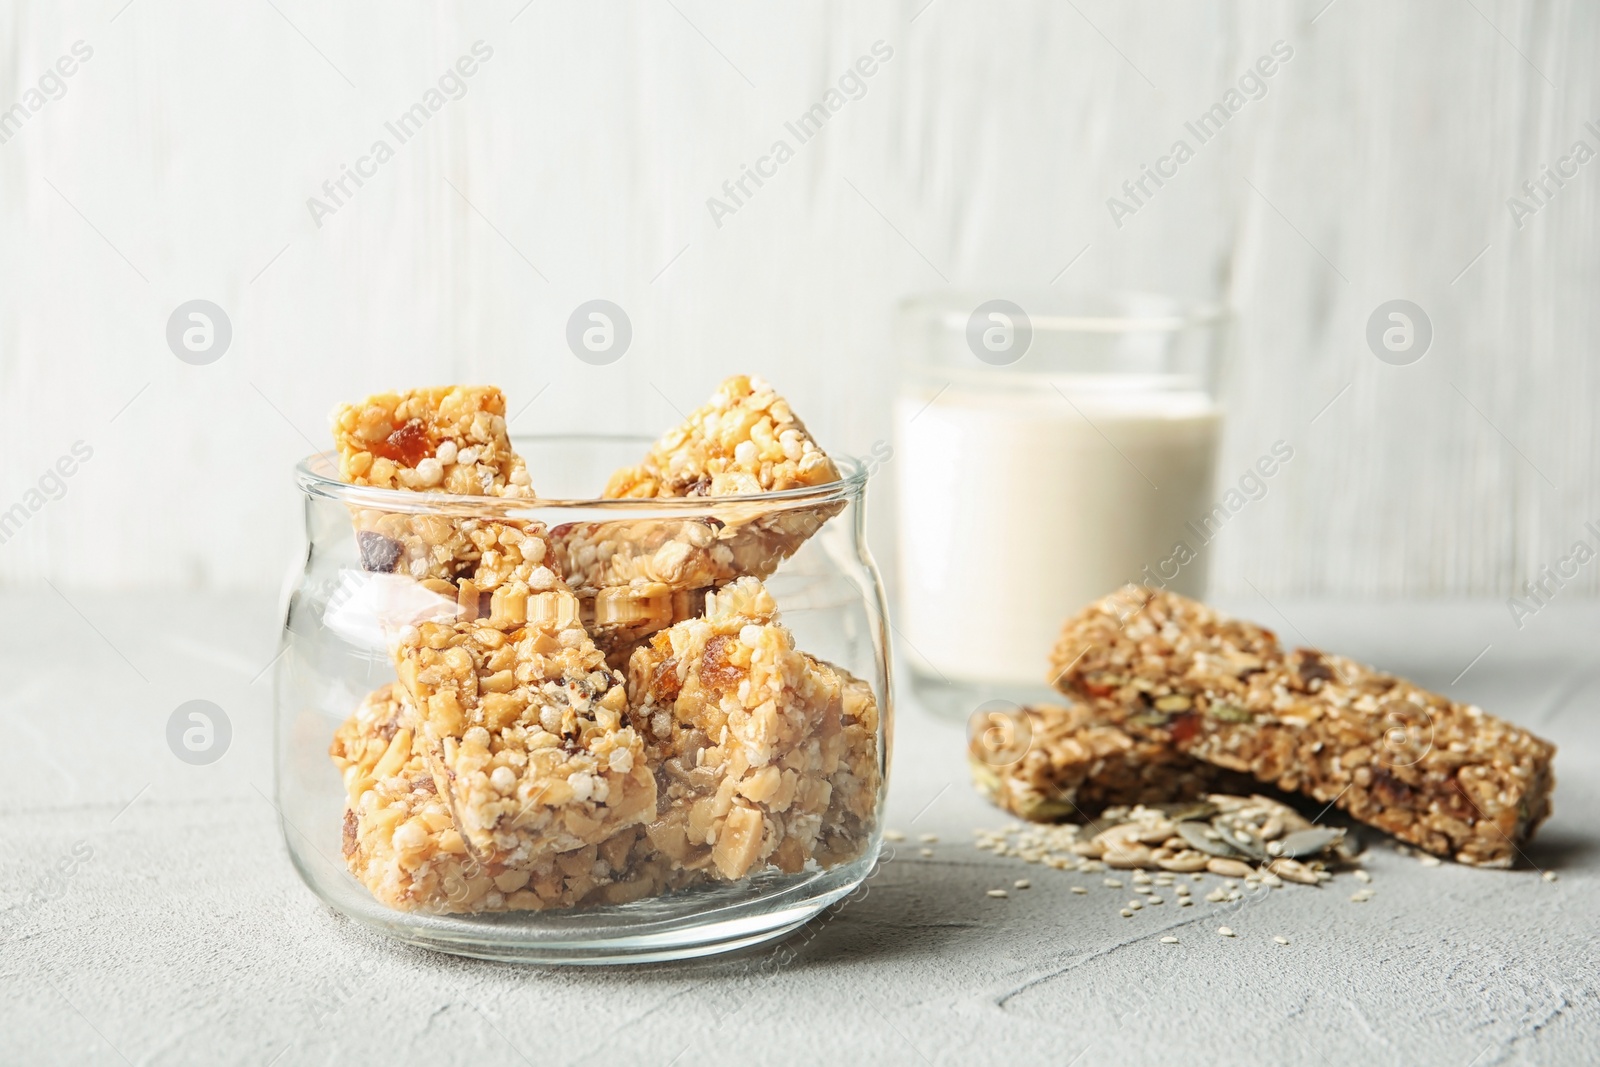 Photo of Jar with different homemade grain cereal bars on table. Healthy snack